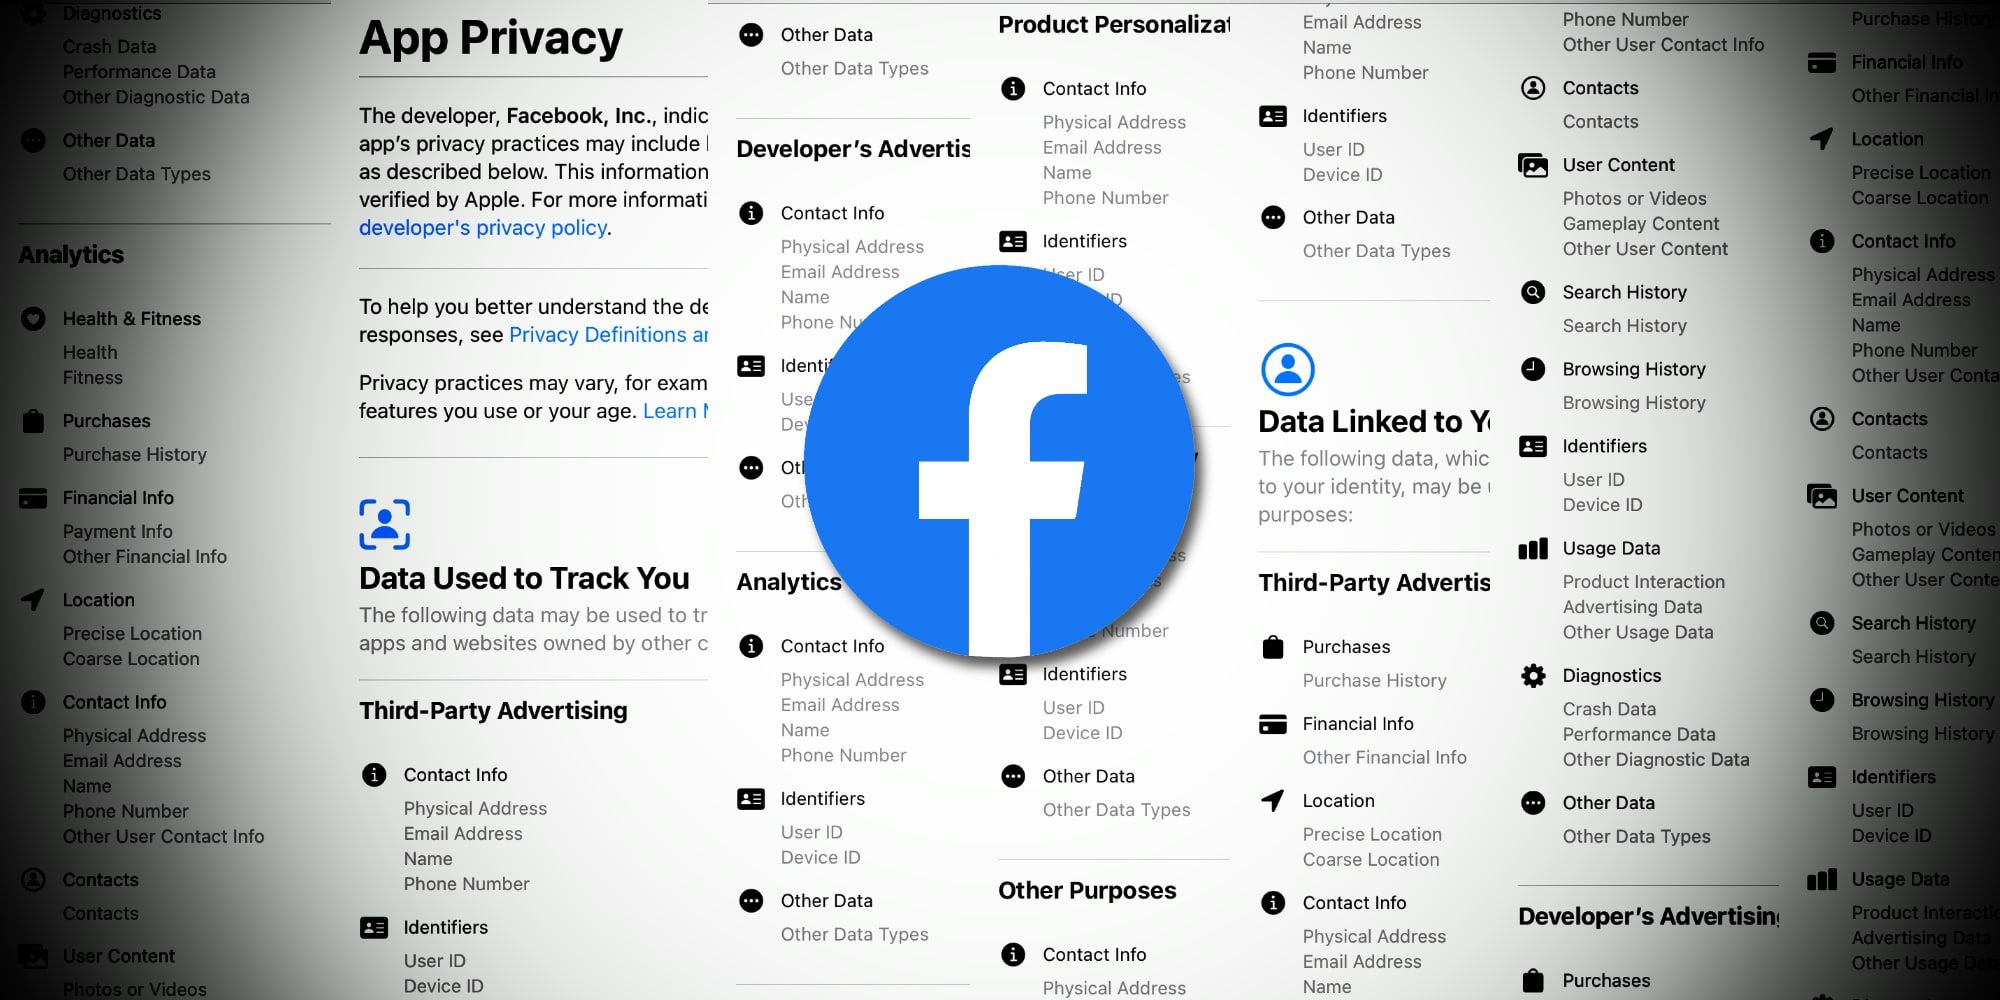 A screenshot of Facebook's app privacy section